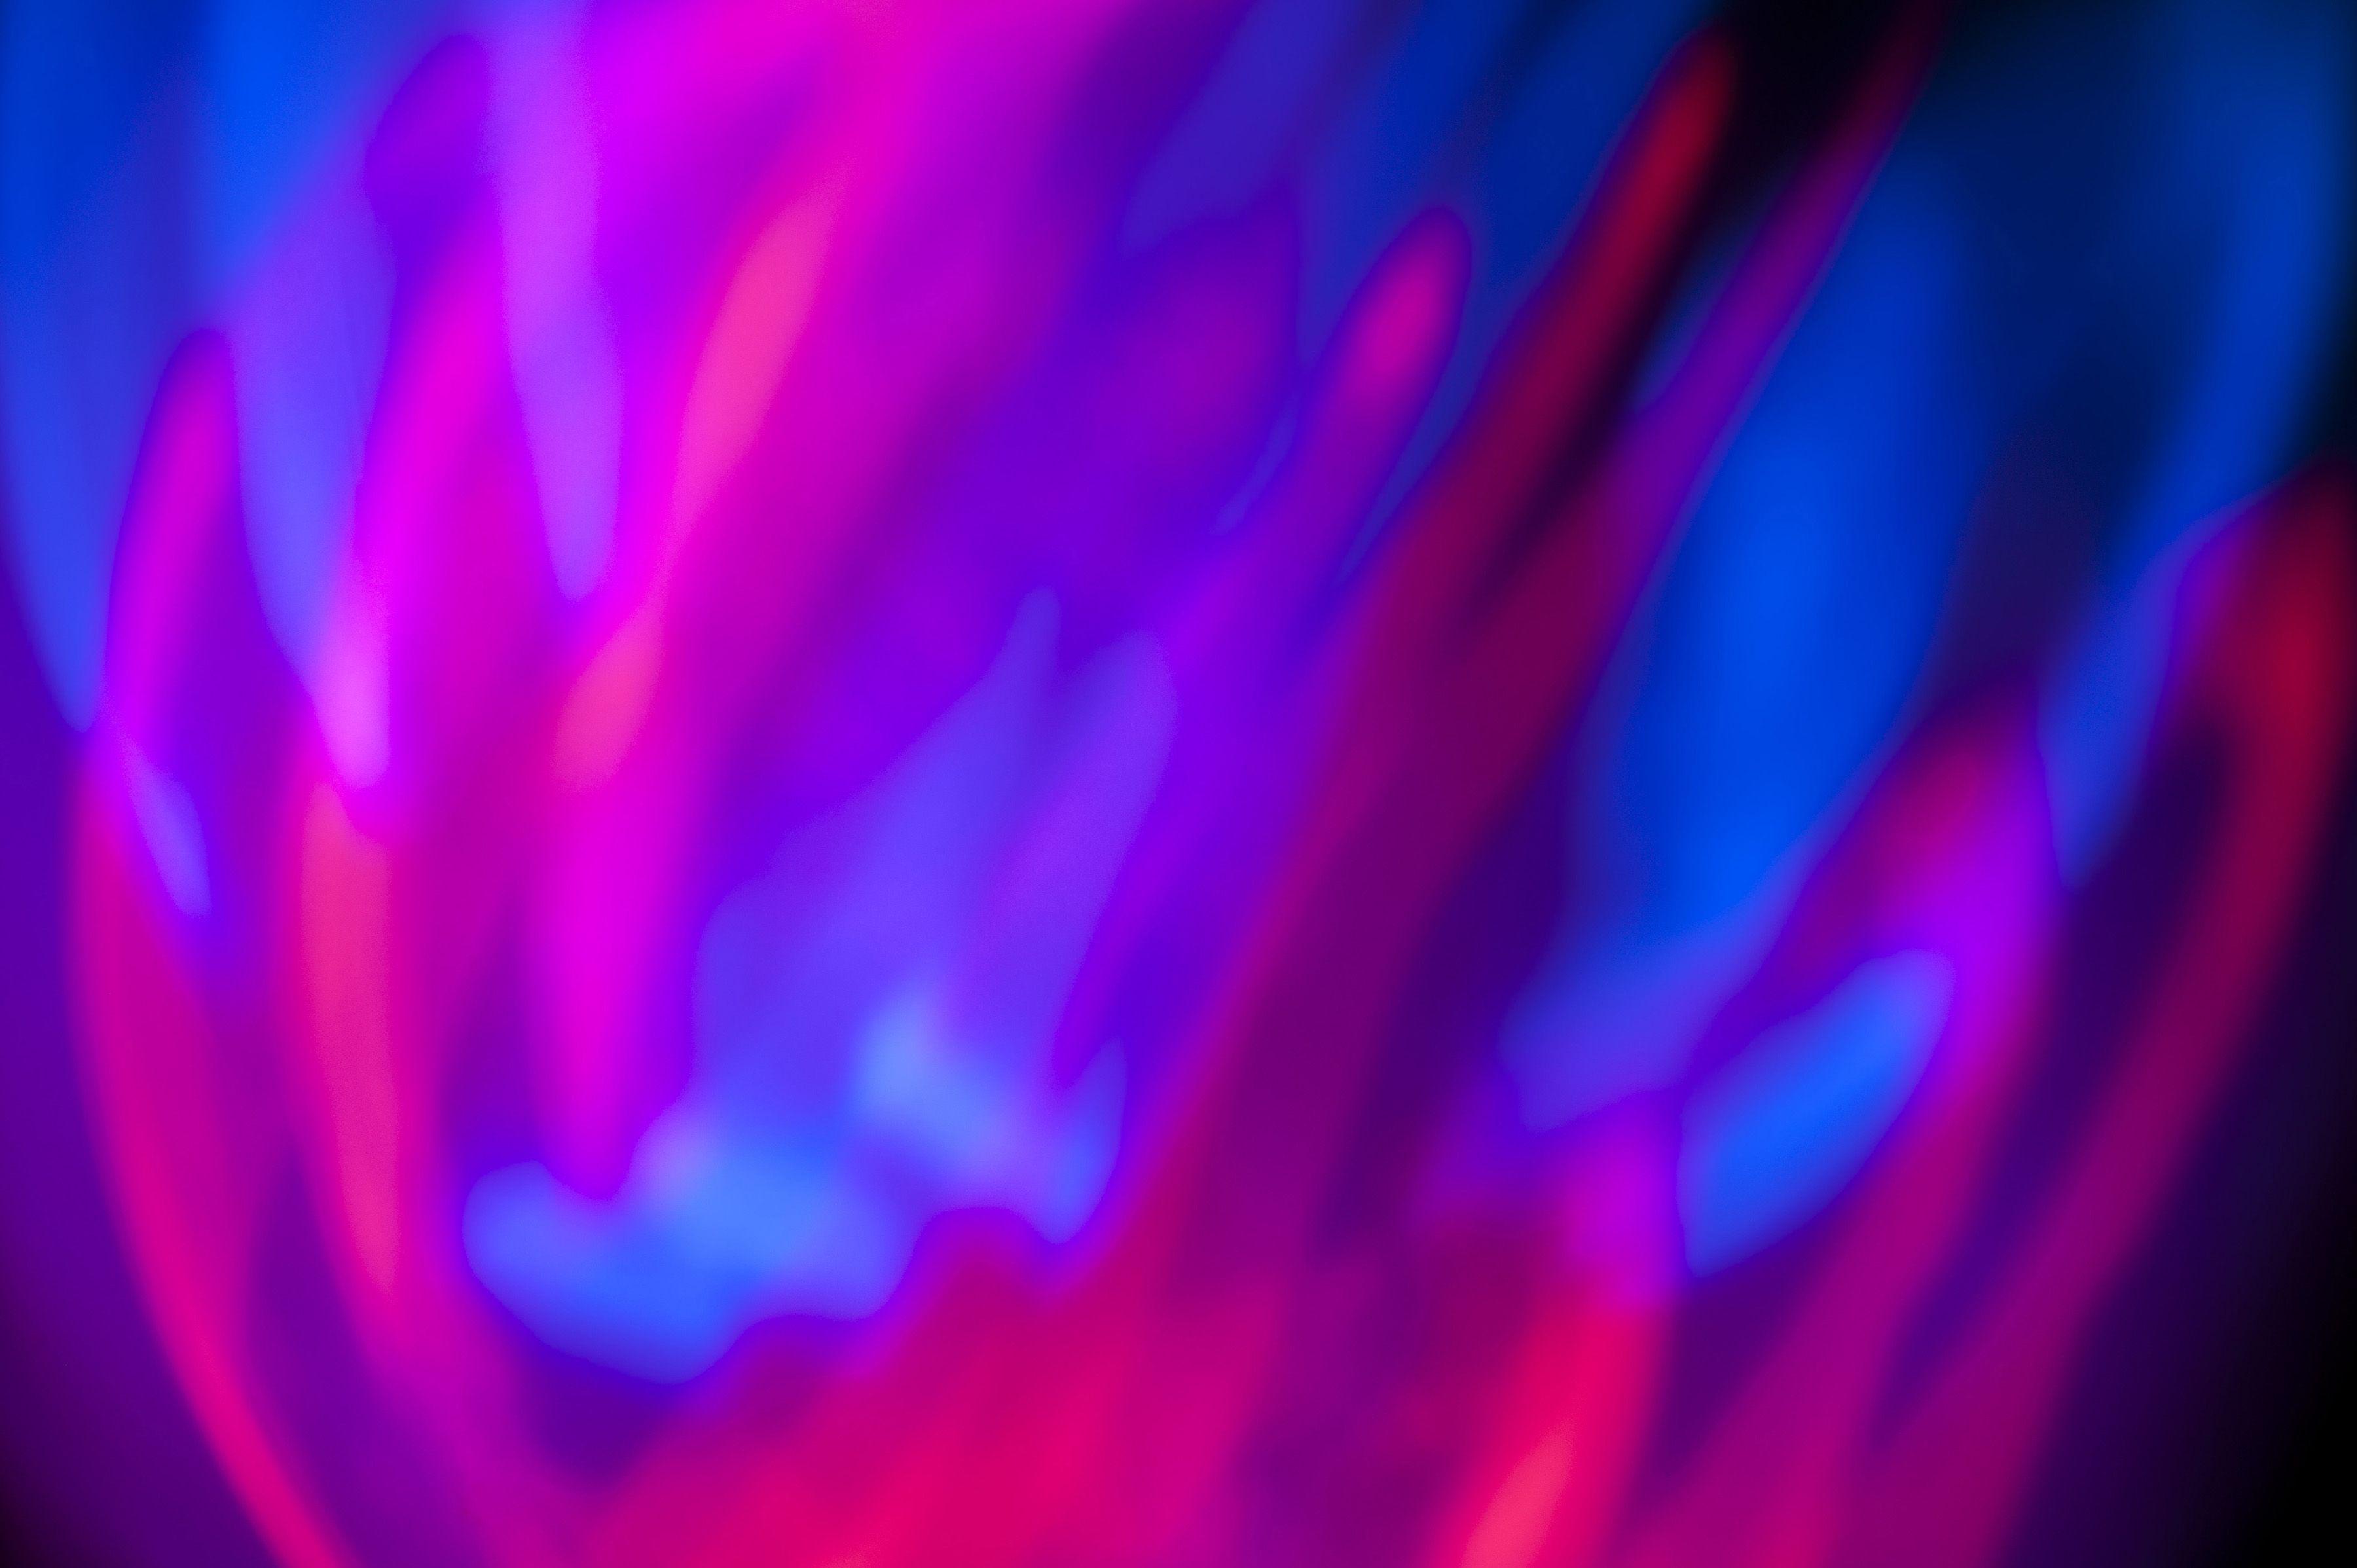 Blurred Red And Blue Abstract Background 9430. Stockarch Free Stock